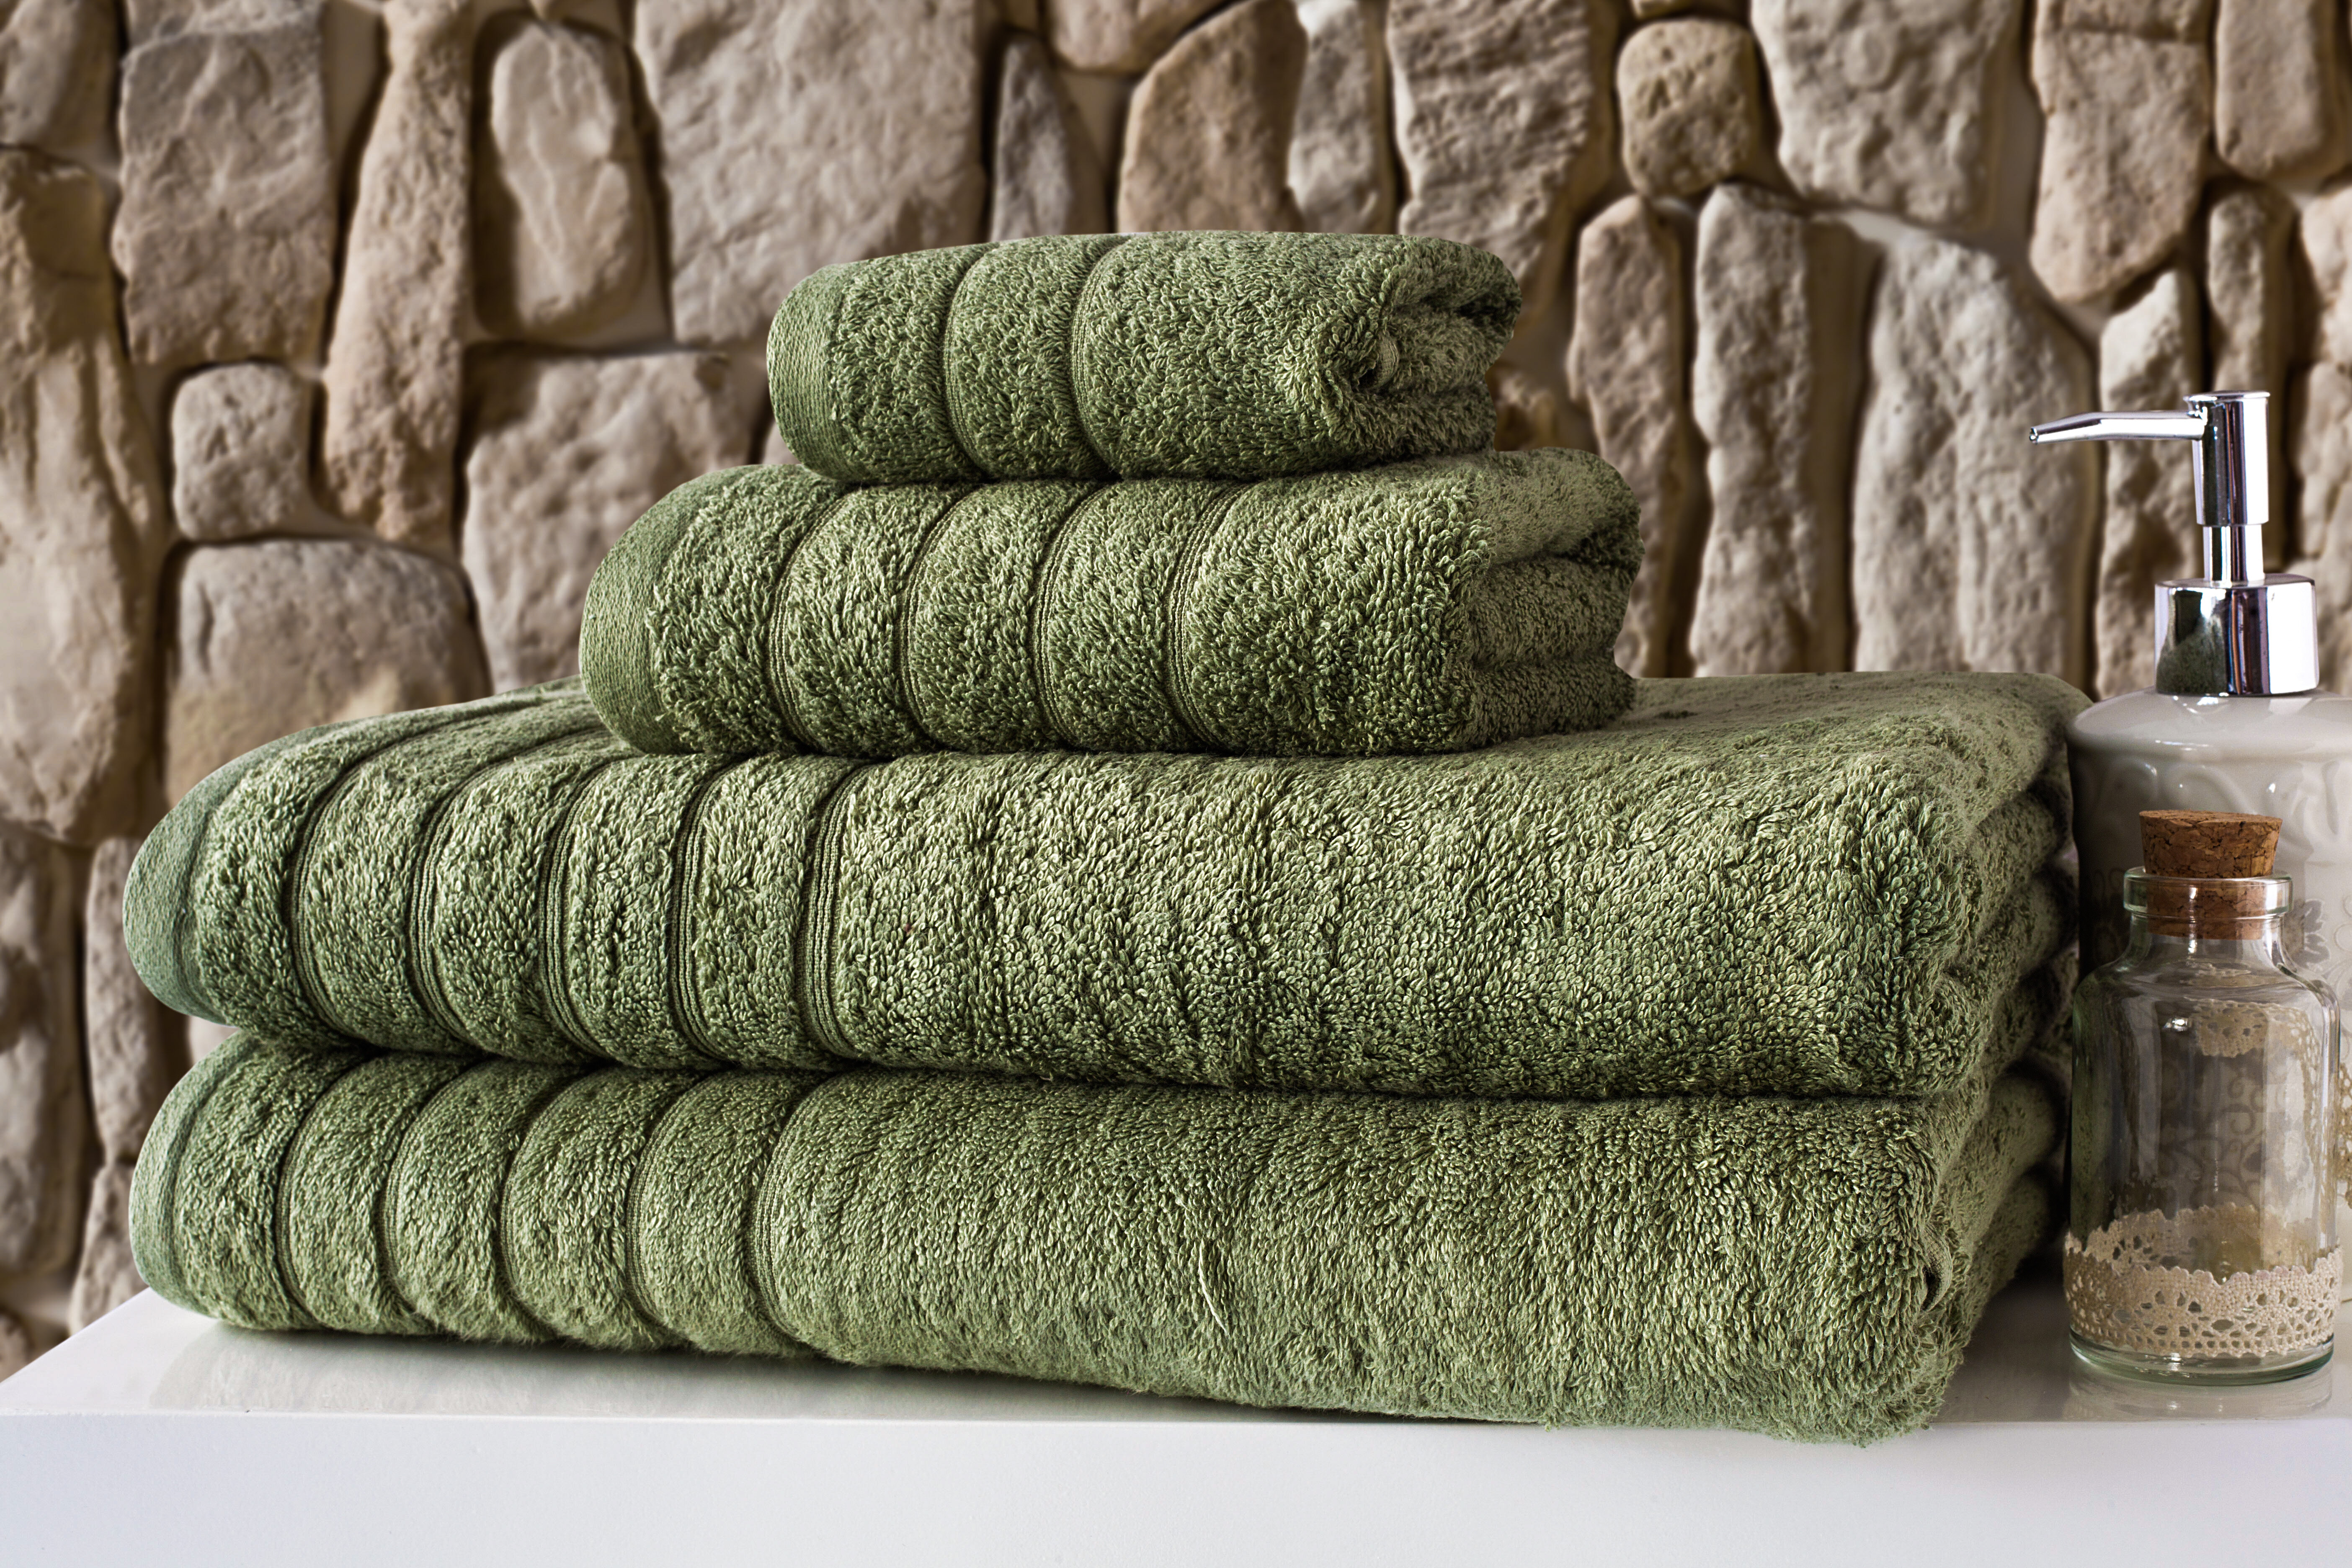 Classic Turkish Towels Luxury Ribbed Bath Towels - Soft Thick